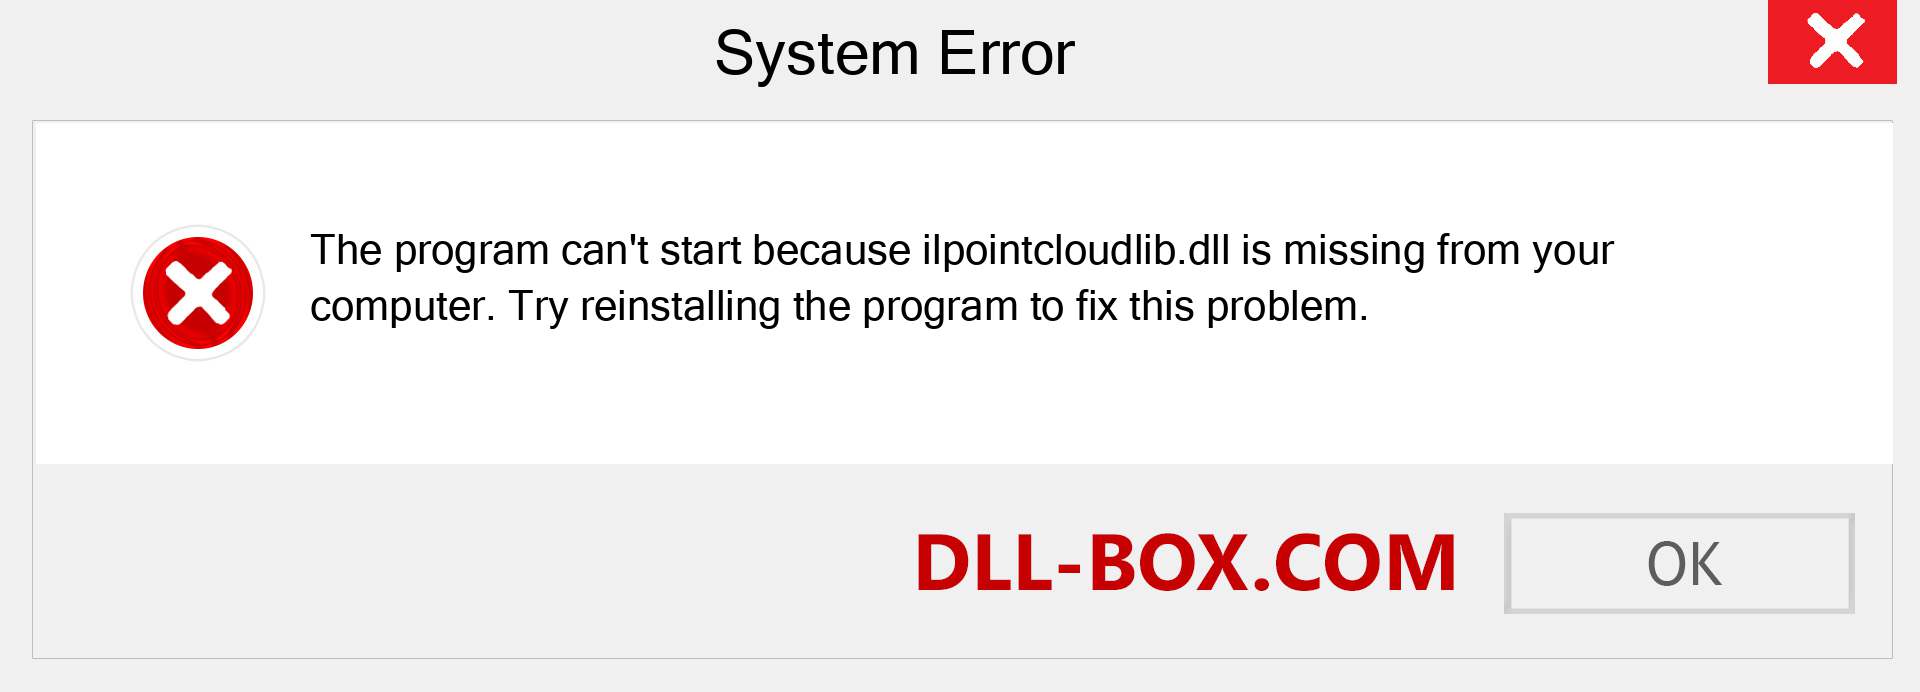  ilpointcloudlib.dll file is missing?. Download for Windows 7, 8, 10 - Fix  ilpointcloudlib dll Missing Error on Windows, photos, images